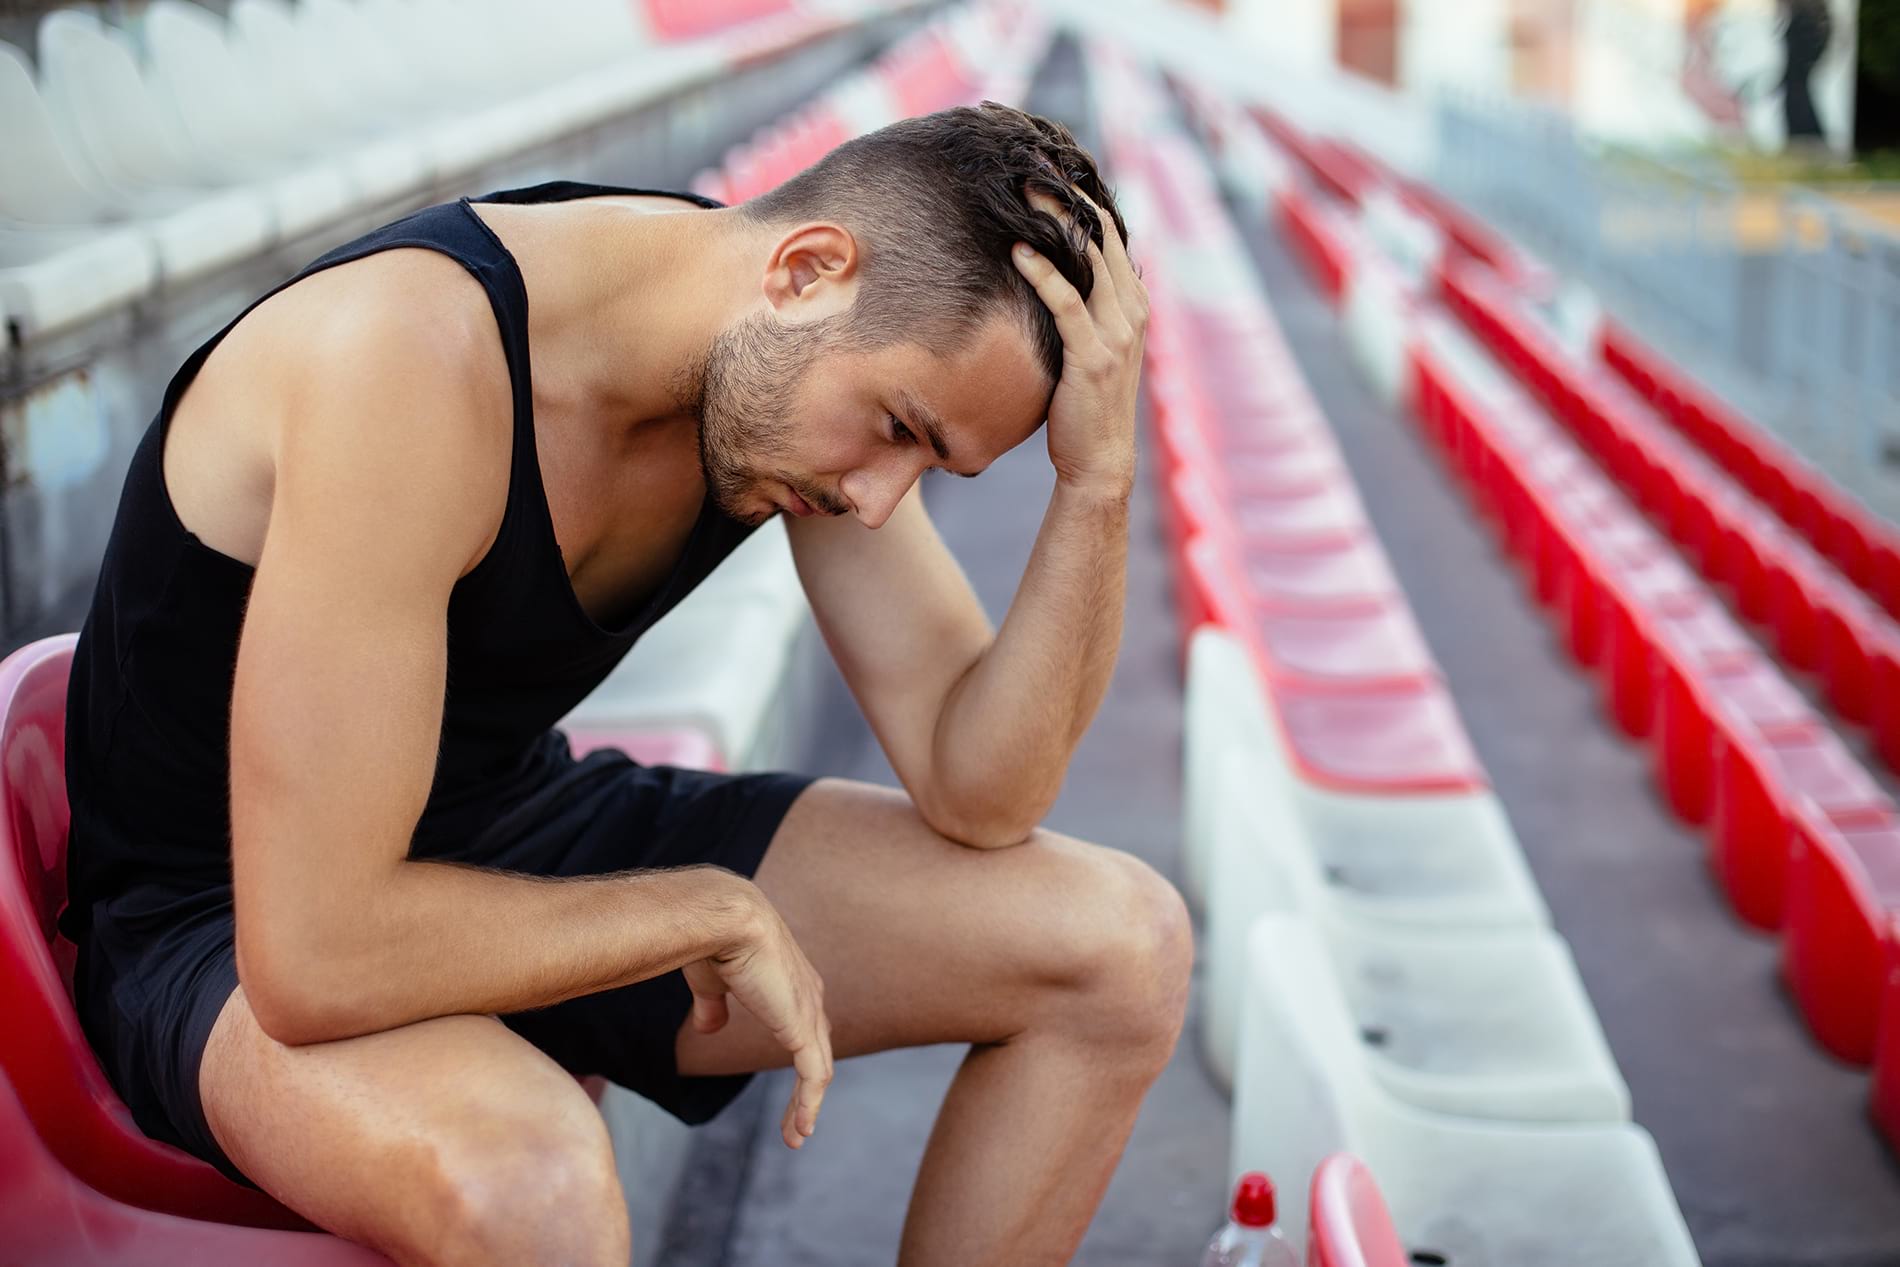 Male athlete sitting down in bleachers looking upset and in need of some sports psychology.